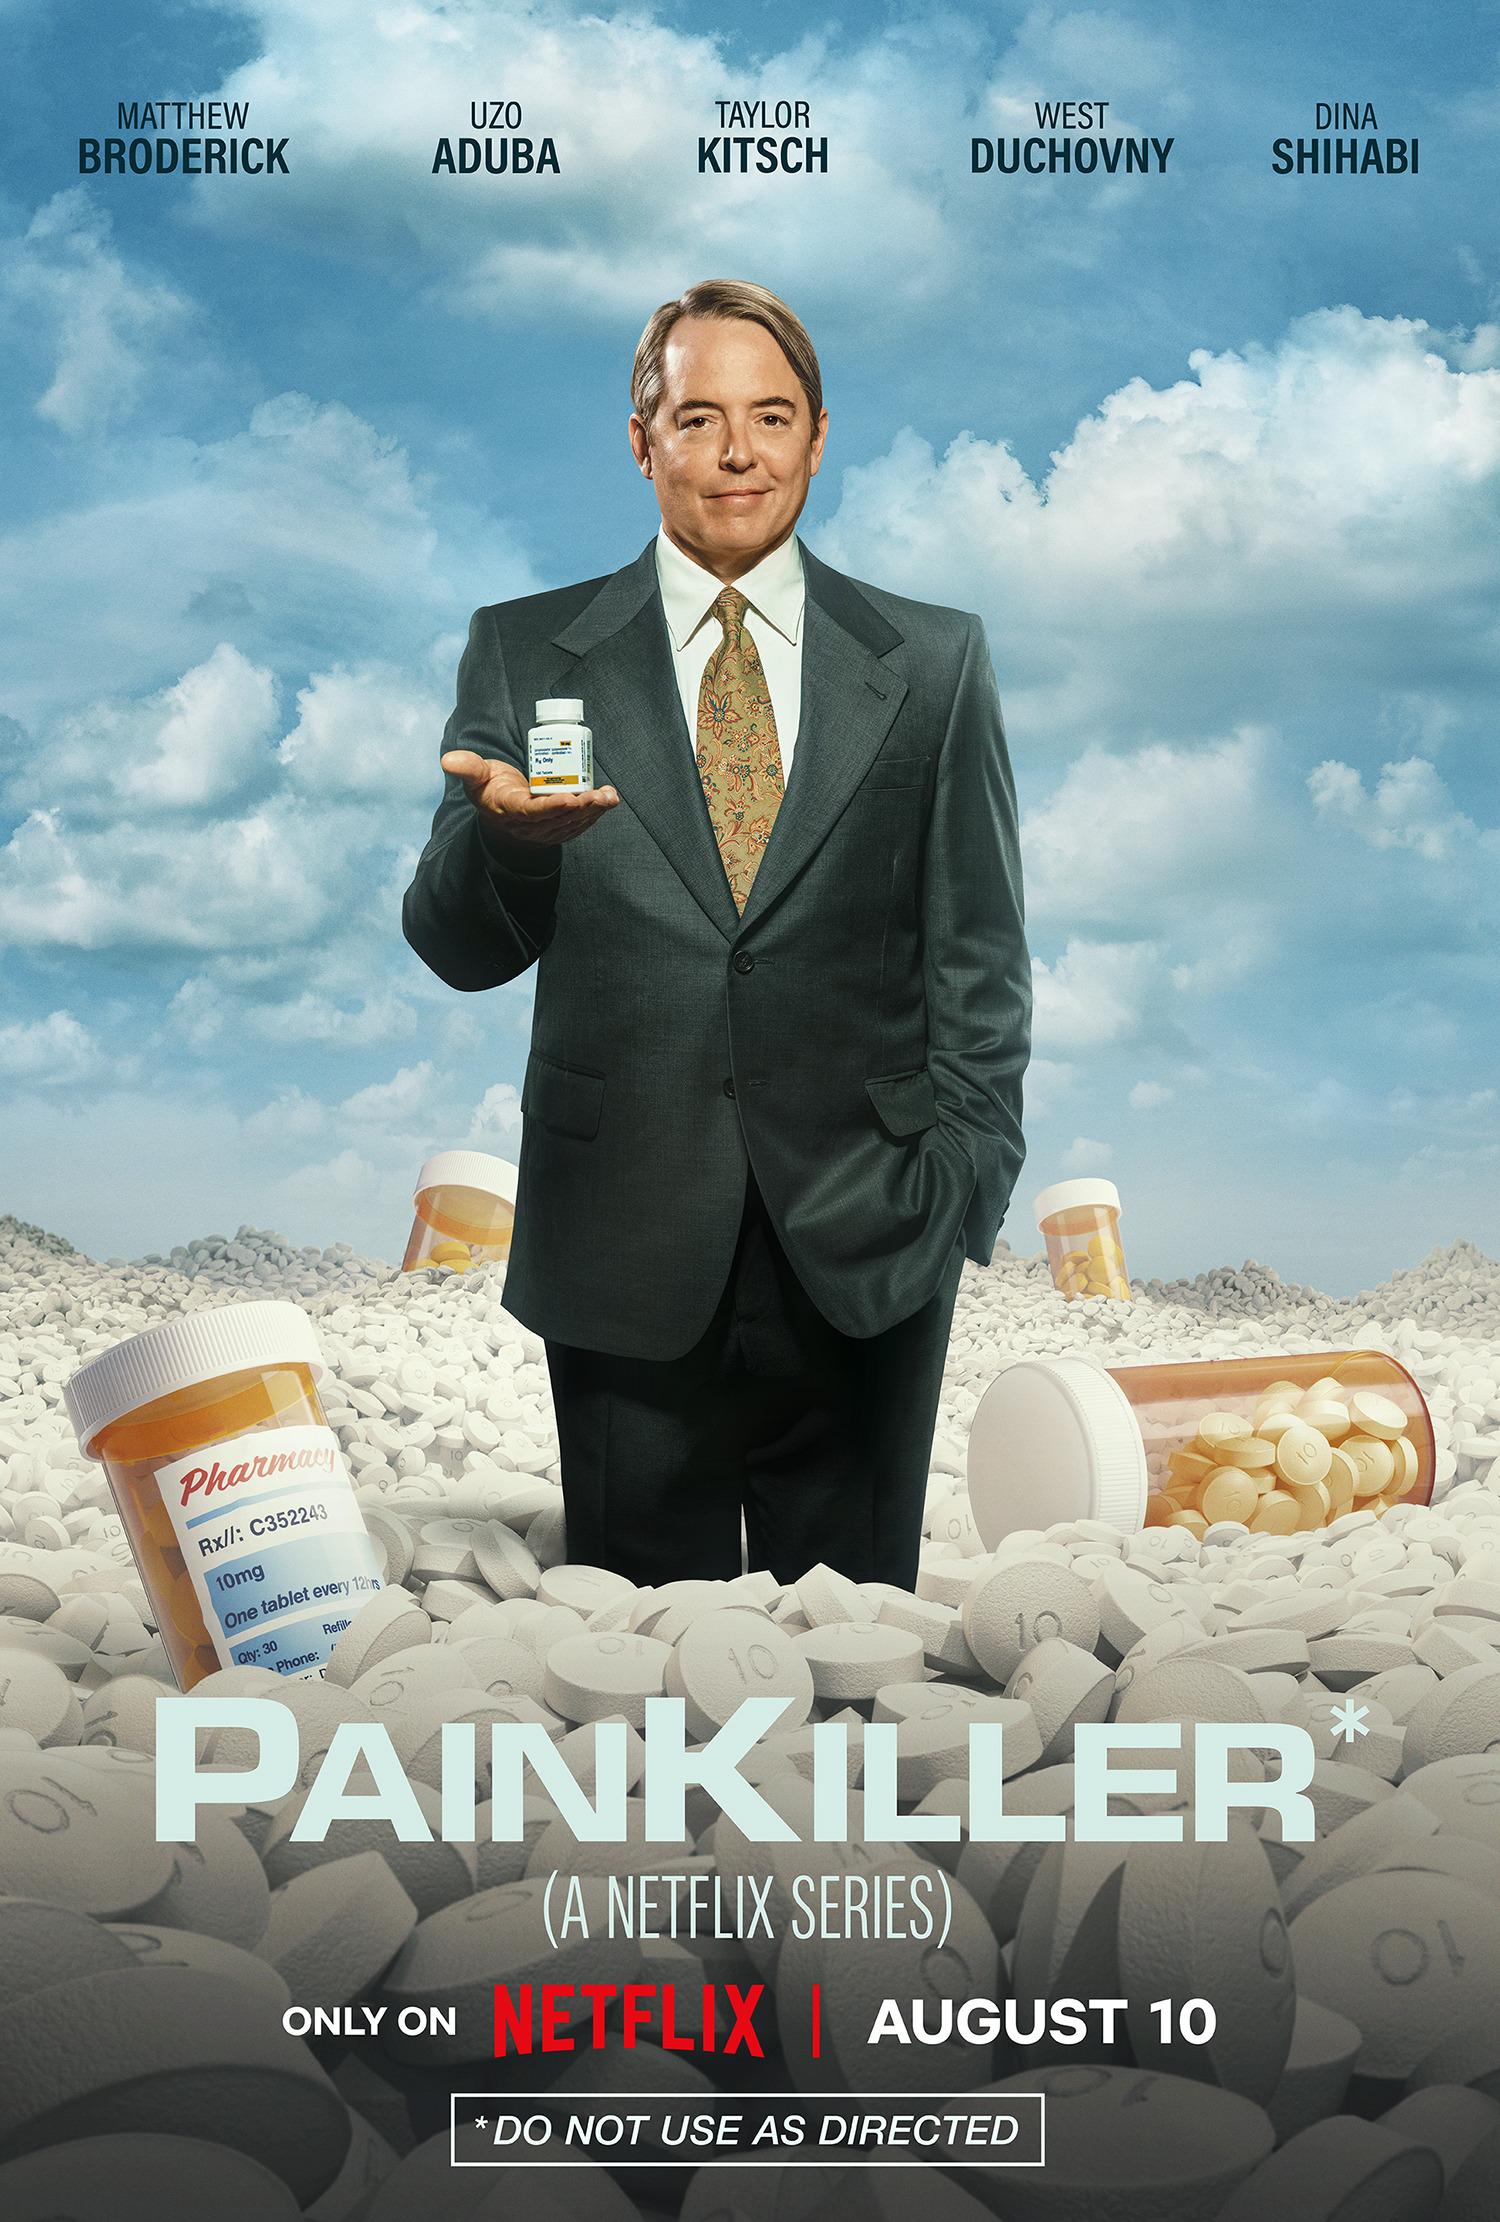 Painkiller (Netflix): Drawing inspiration from Barry Meier's book Pain Killer and a New Yorker article, The Family That Built an Empire of Pain by Patrick Radden Keefe, the limited series Painkiller provides a fictional retelling of the events surrounding America's opioid crisis.